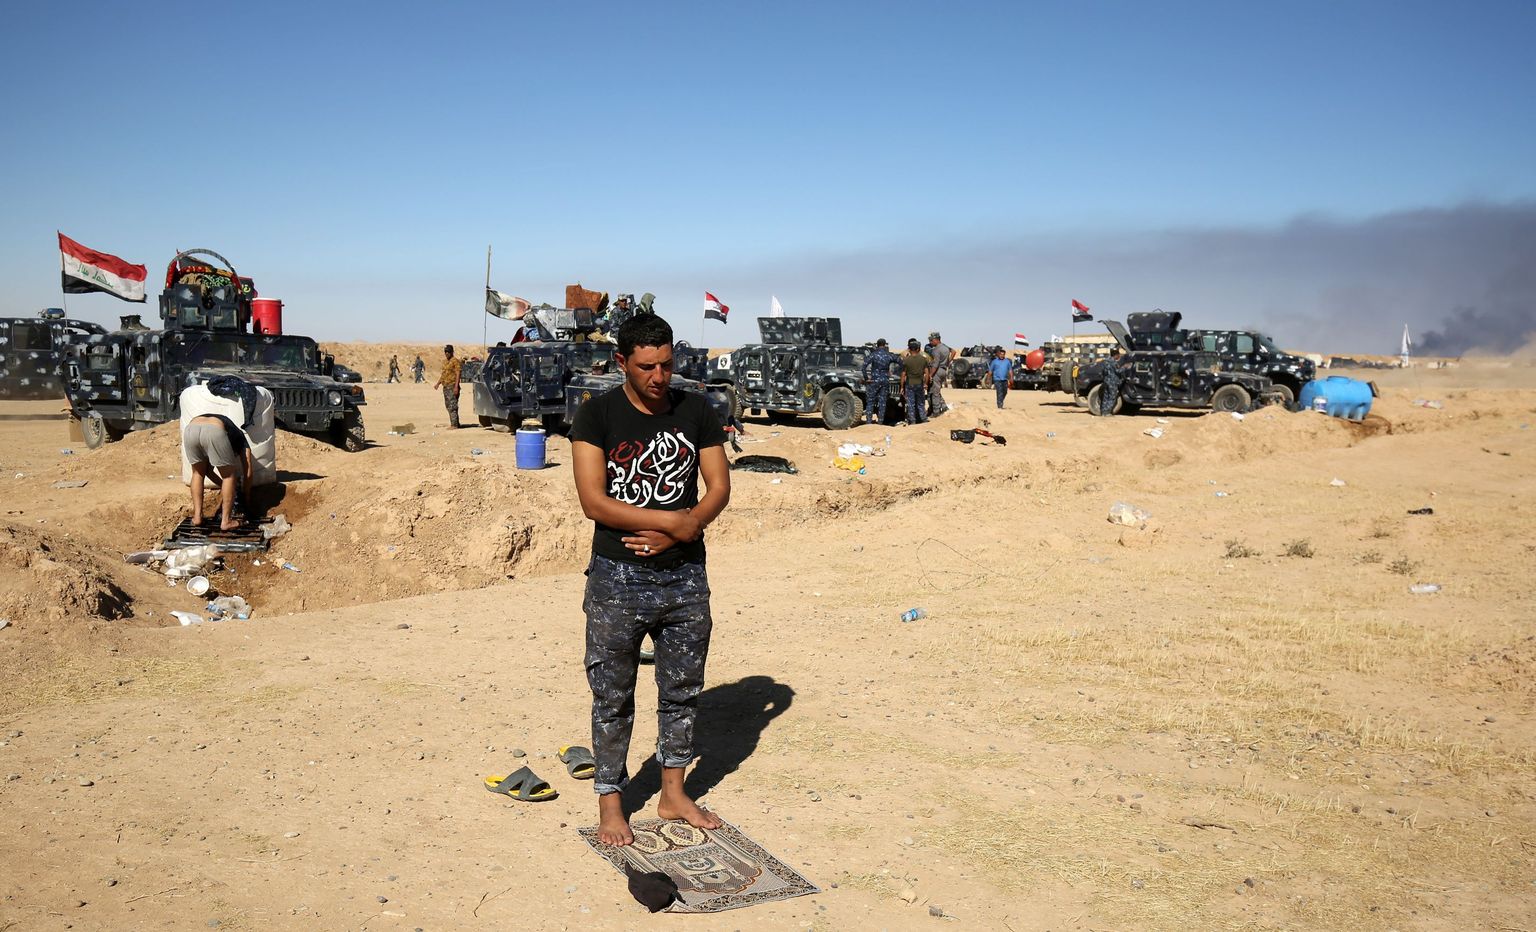 A Sunni Iraqi policeman prays at the Qayyarah military base, about 60 kilometres (35 miles) south of Mosul, on October 16, 2016, as they prepare for an offensive to retake Mosul, the last IS-held city in the country, after regaining much of the territory the jihadists seized in 2014 and 2015. / AFP PHOTO / AHMAD AL-RUBAYE